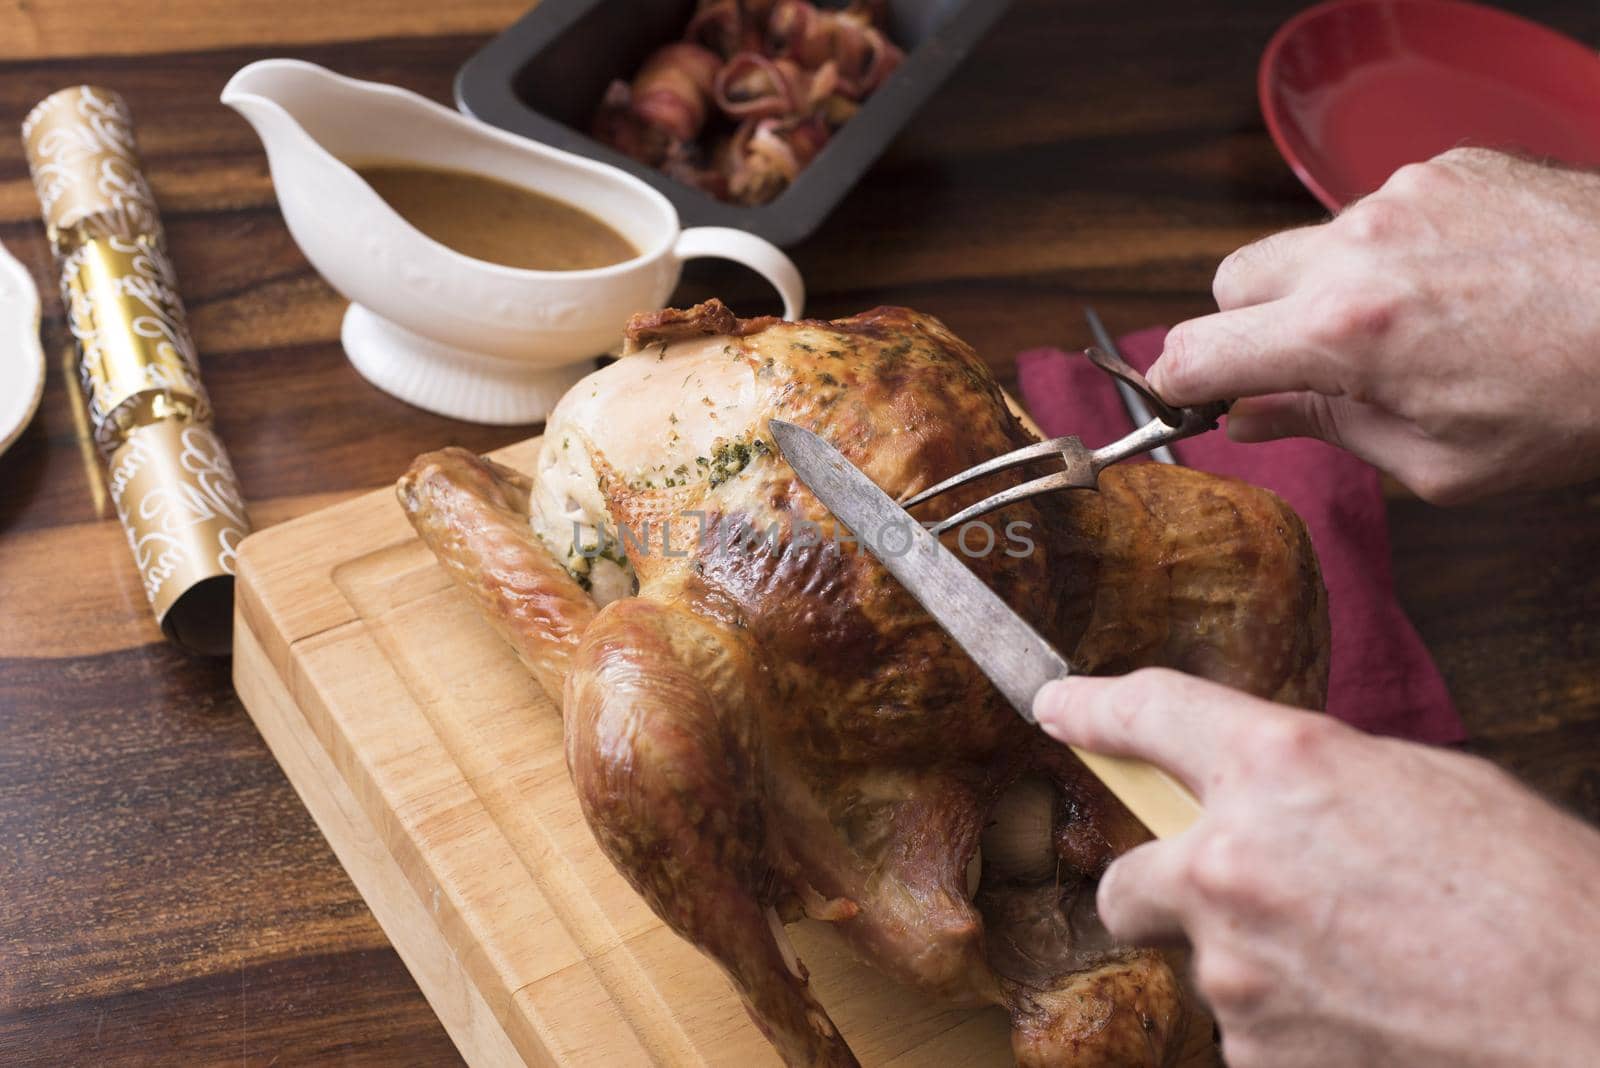 Man carving a Christmas turkey with vintage bone handled utensils on a wooden cutting board on a decorated table with gravy in a sauce boat